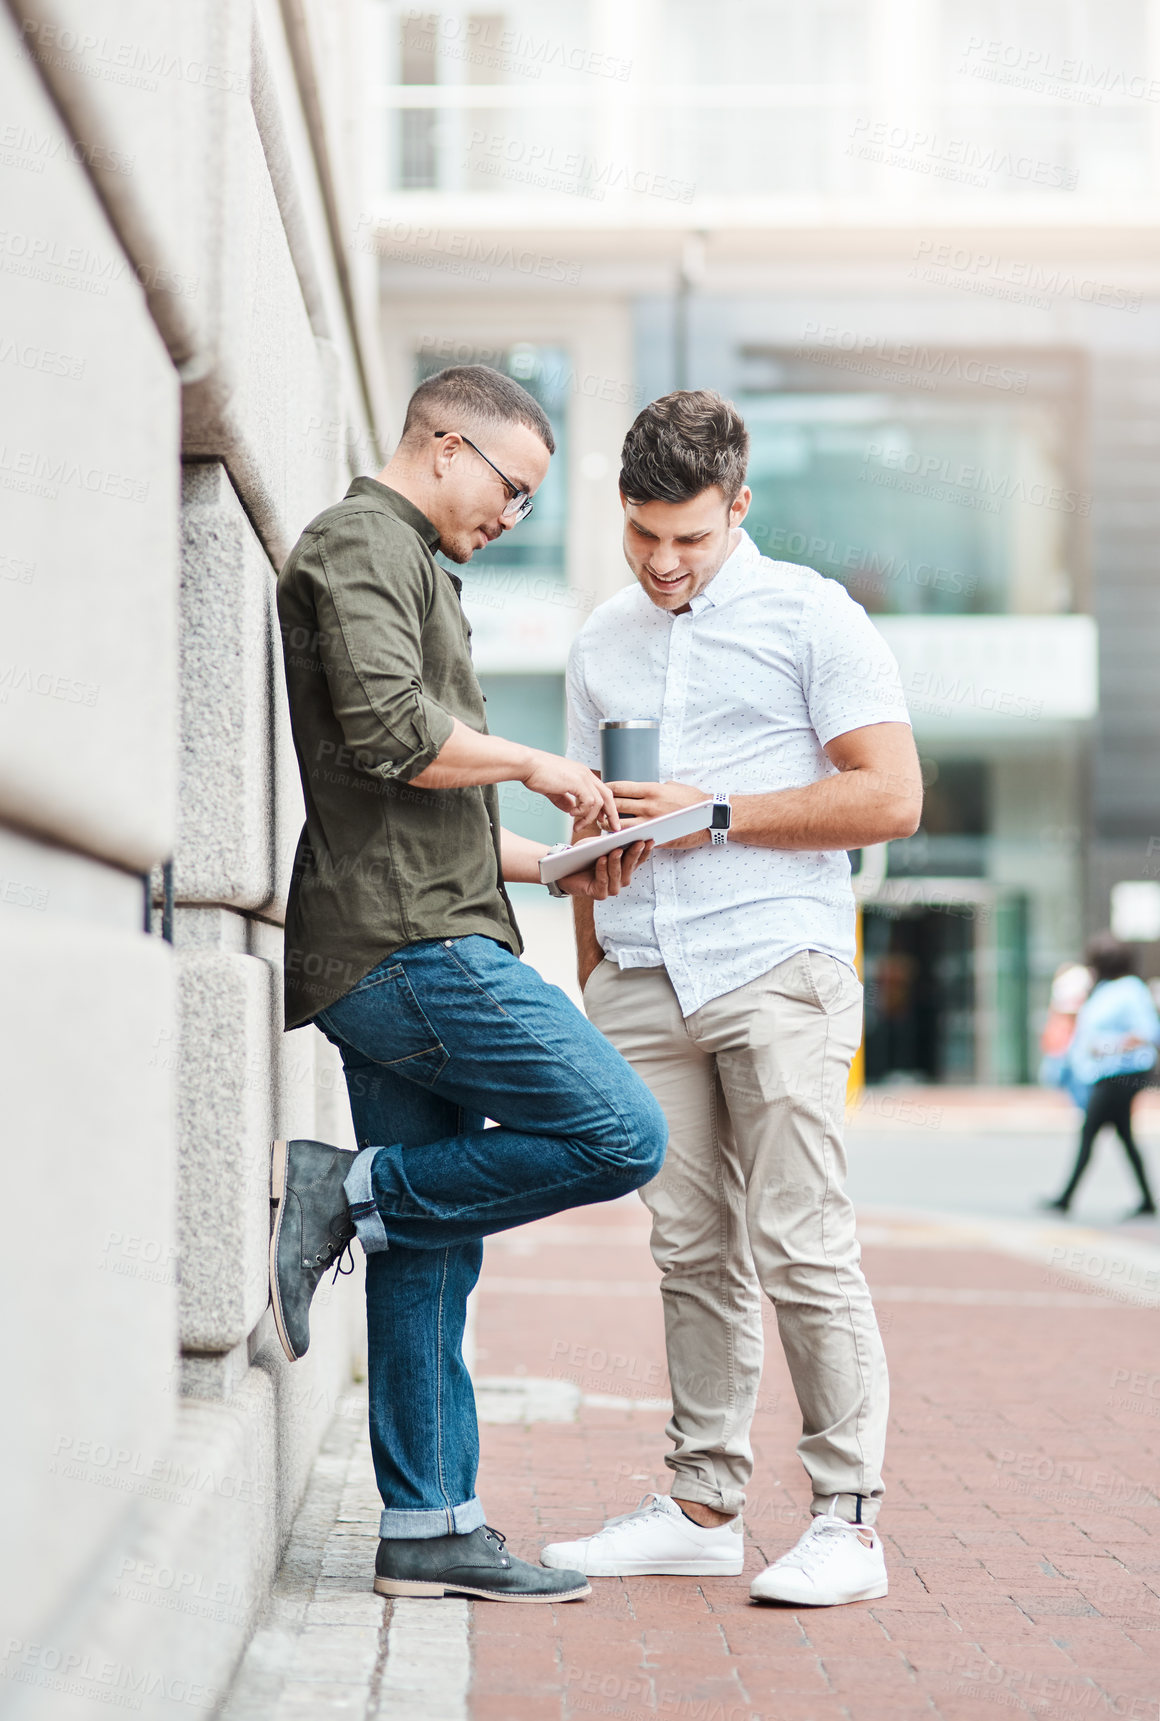 Buy stock photo Shot of two young businessmen using a digital tablet together against an urban background